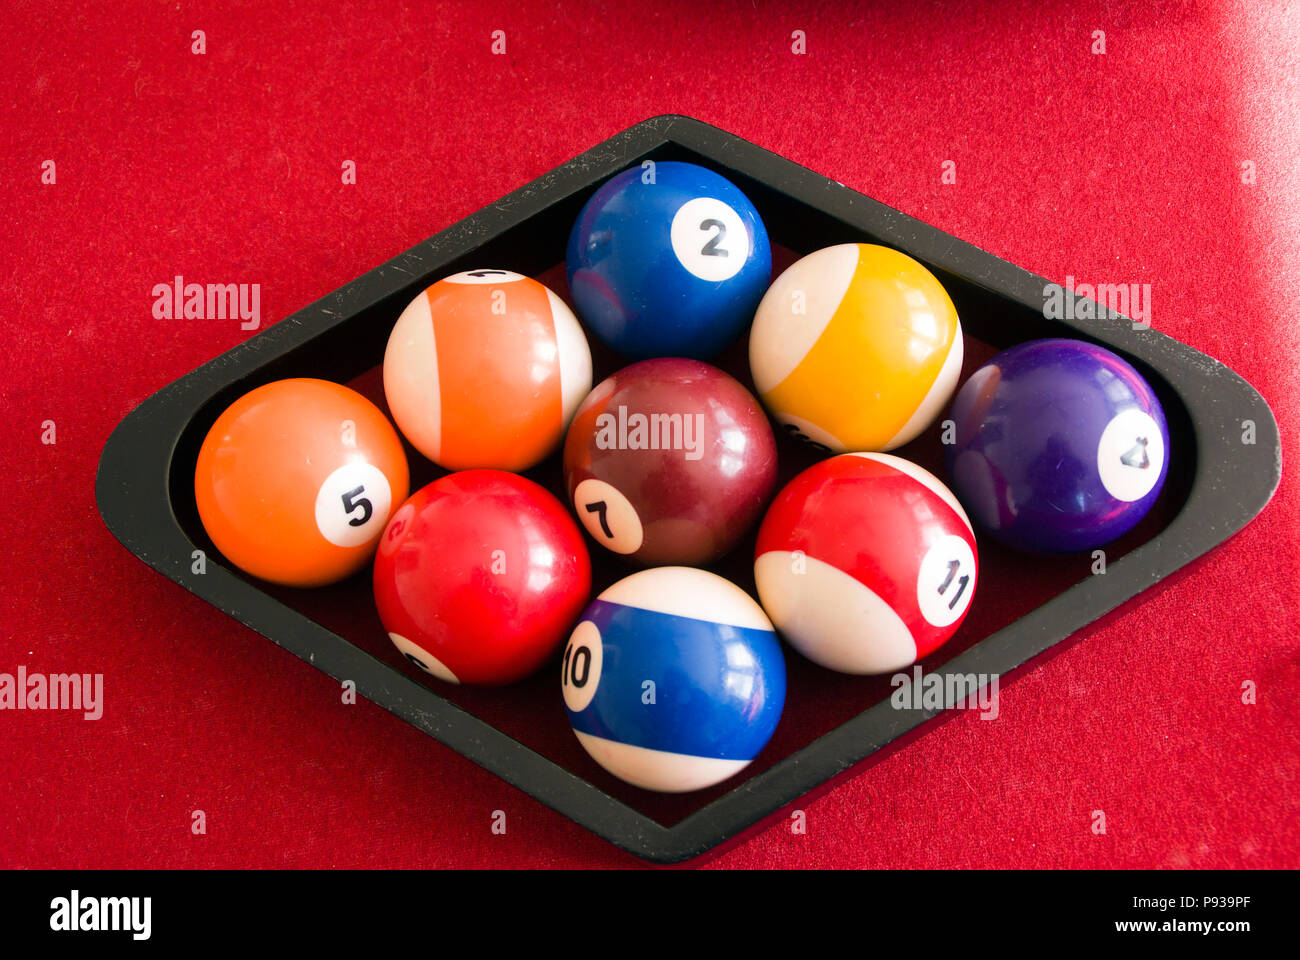 About the Nine-Ball Pool Game